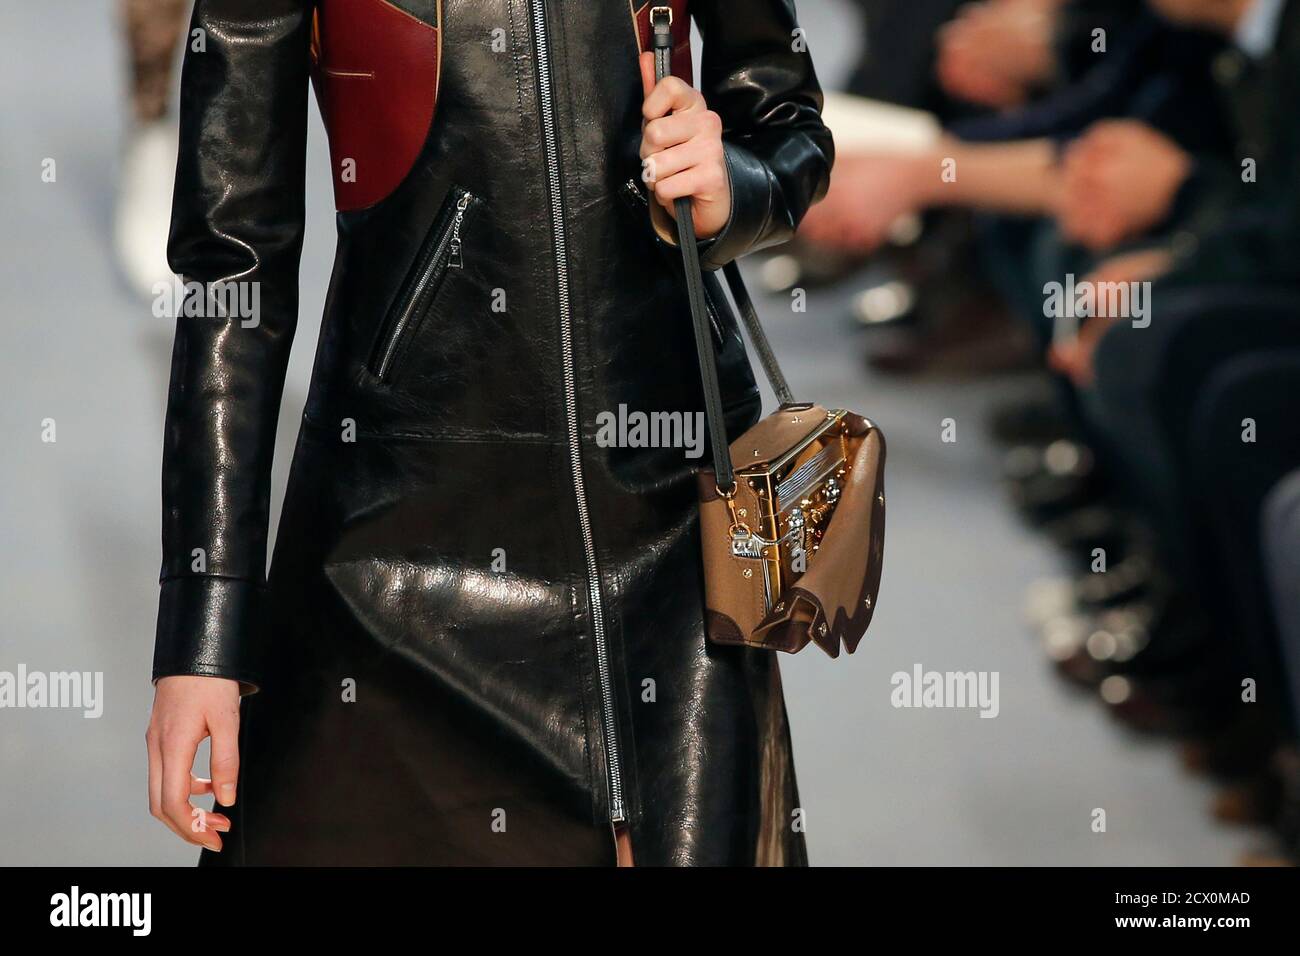 A model presents a hand bag creation by French designer Nicolas Ghesquiere  for fashion house Louis Vuitton as part of his Fall/Winter 2014-2015  women's ready-to-wear collection show during Paris Fashion Week March